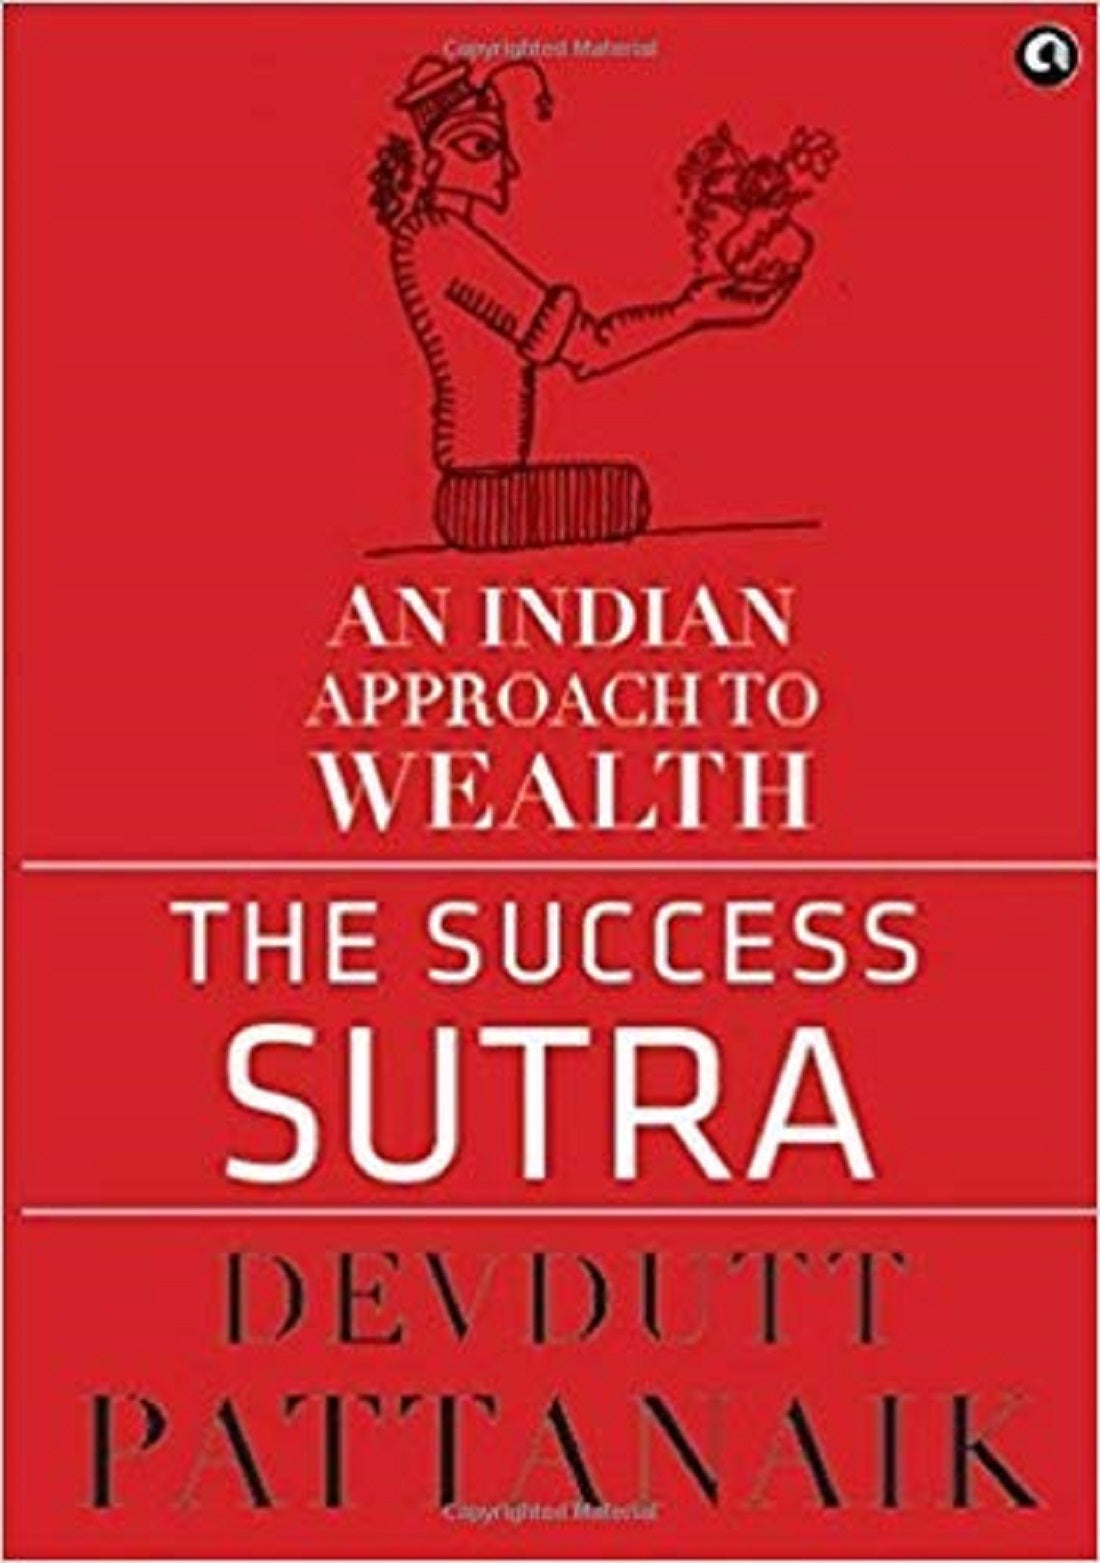 THE SUCCESS SUTRA